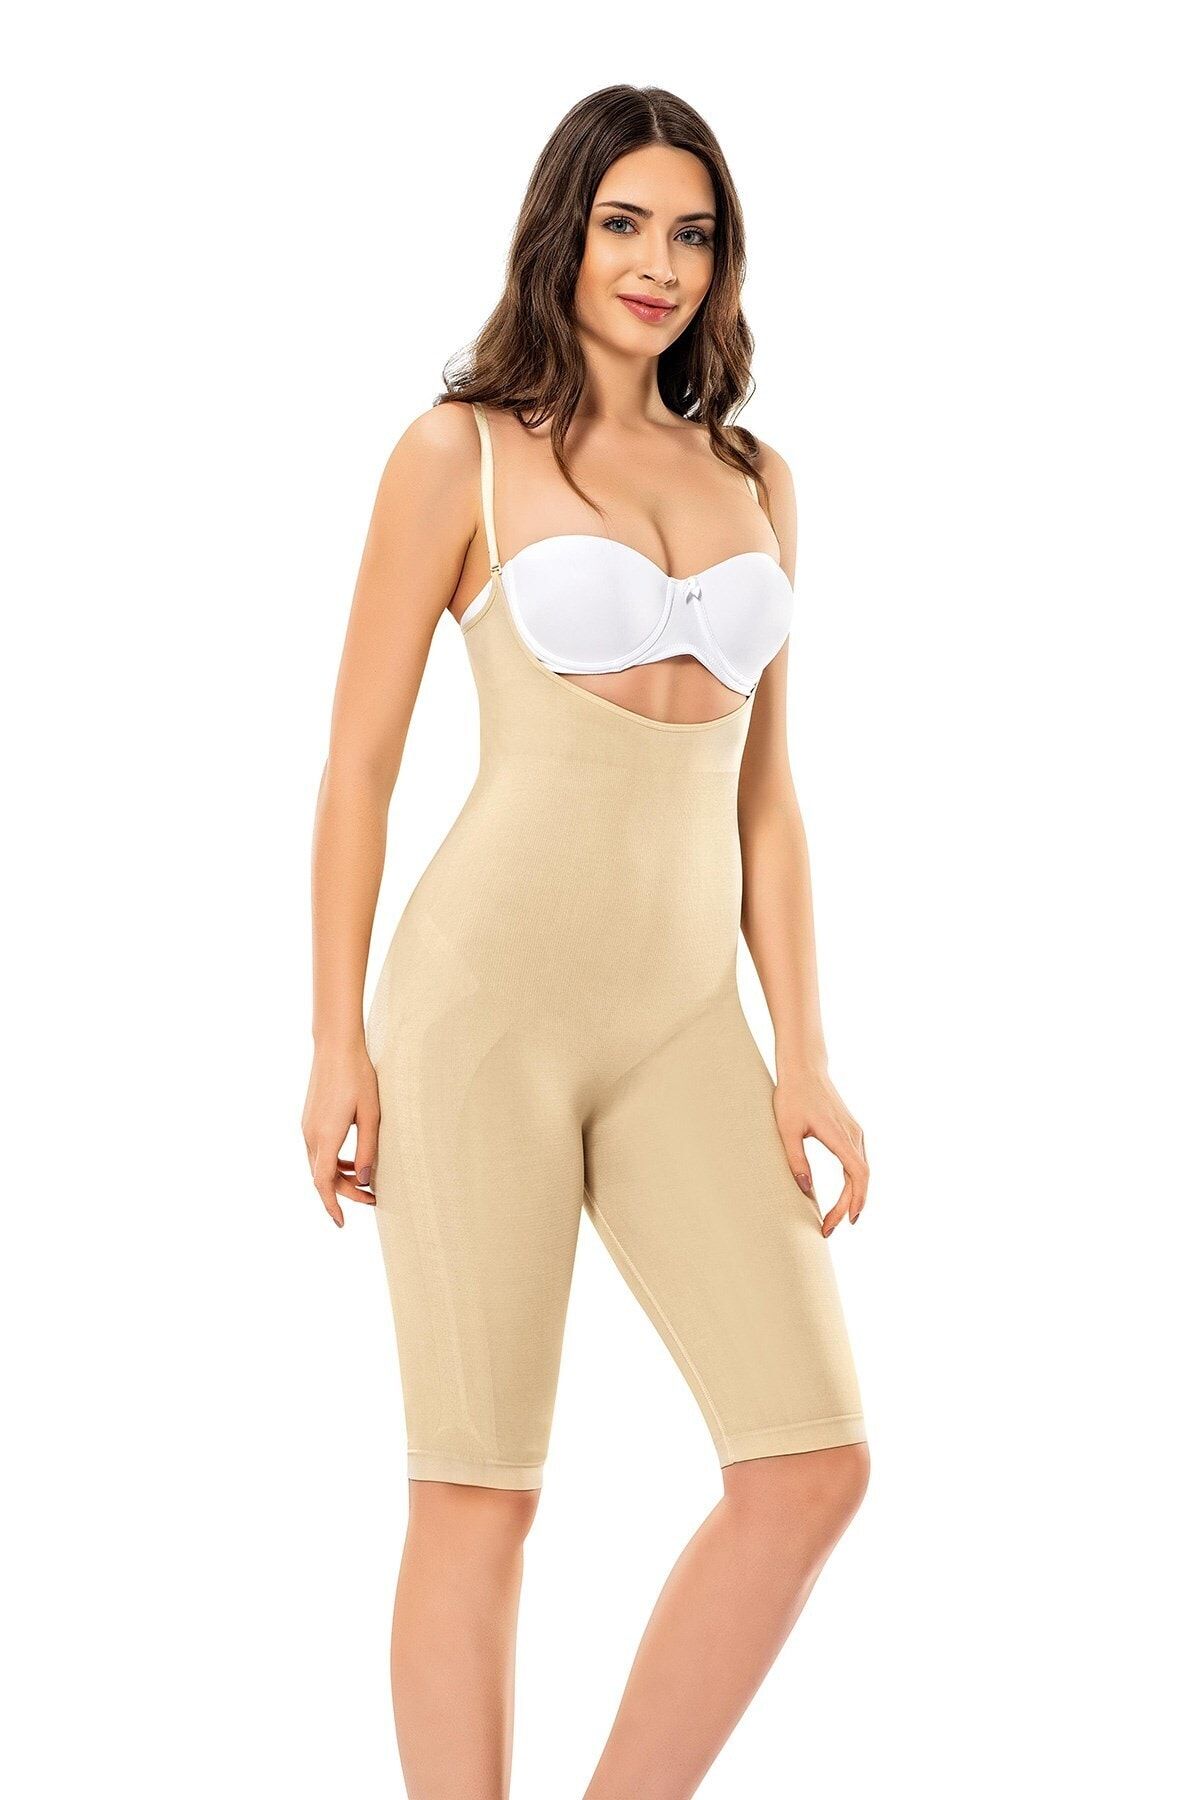 Miss Modinn Women's Beige Breastless Body Corset Reduces One Size,  Tightens, Provides Fit Posture - Trendyol